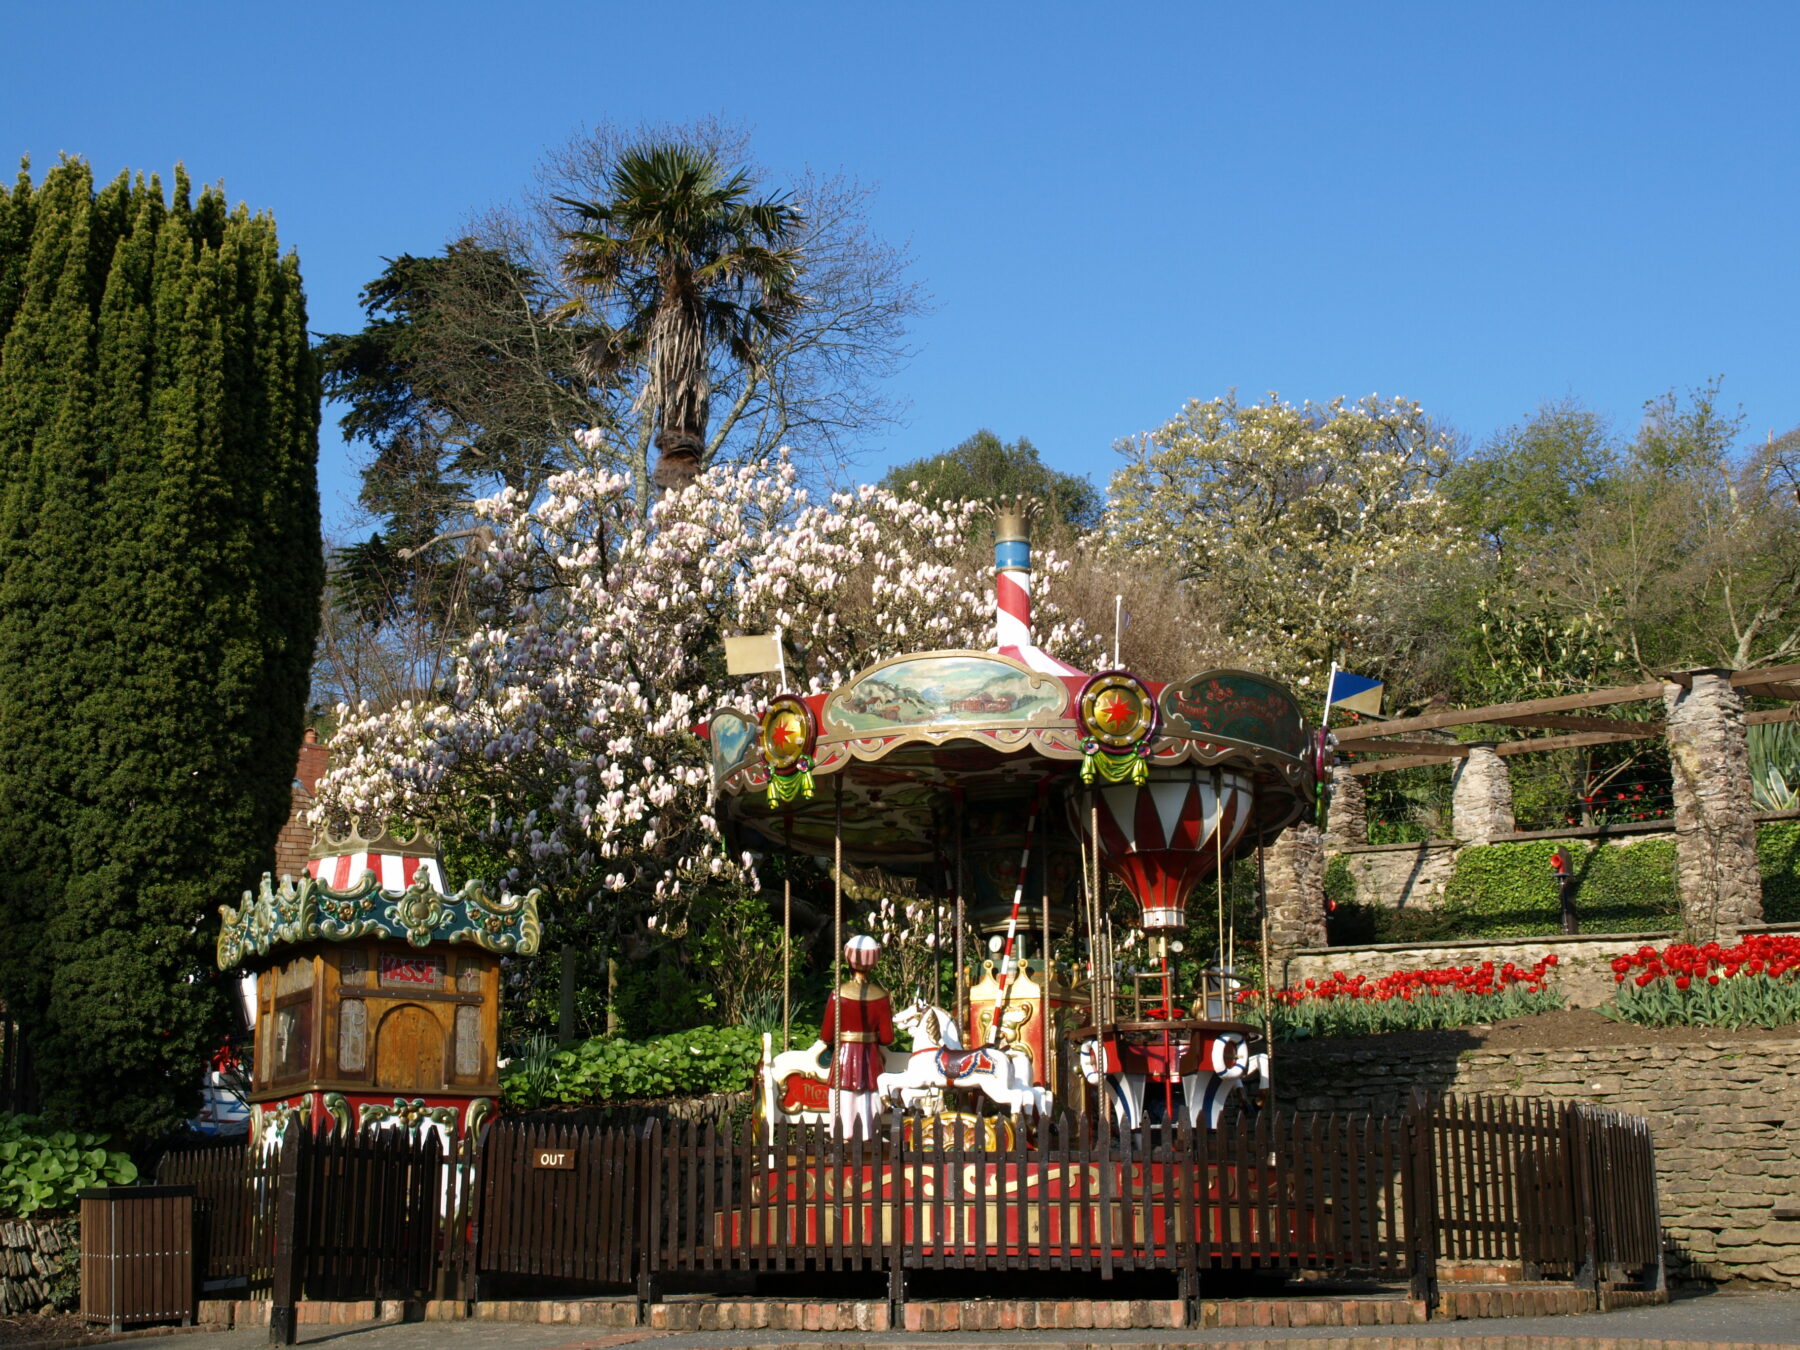 Watermouth Castle Carousel